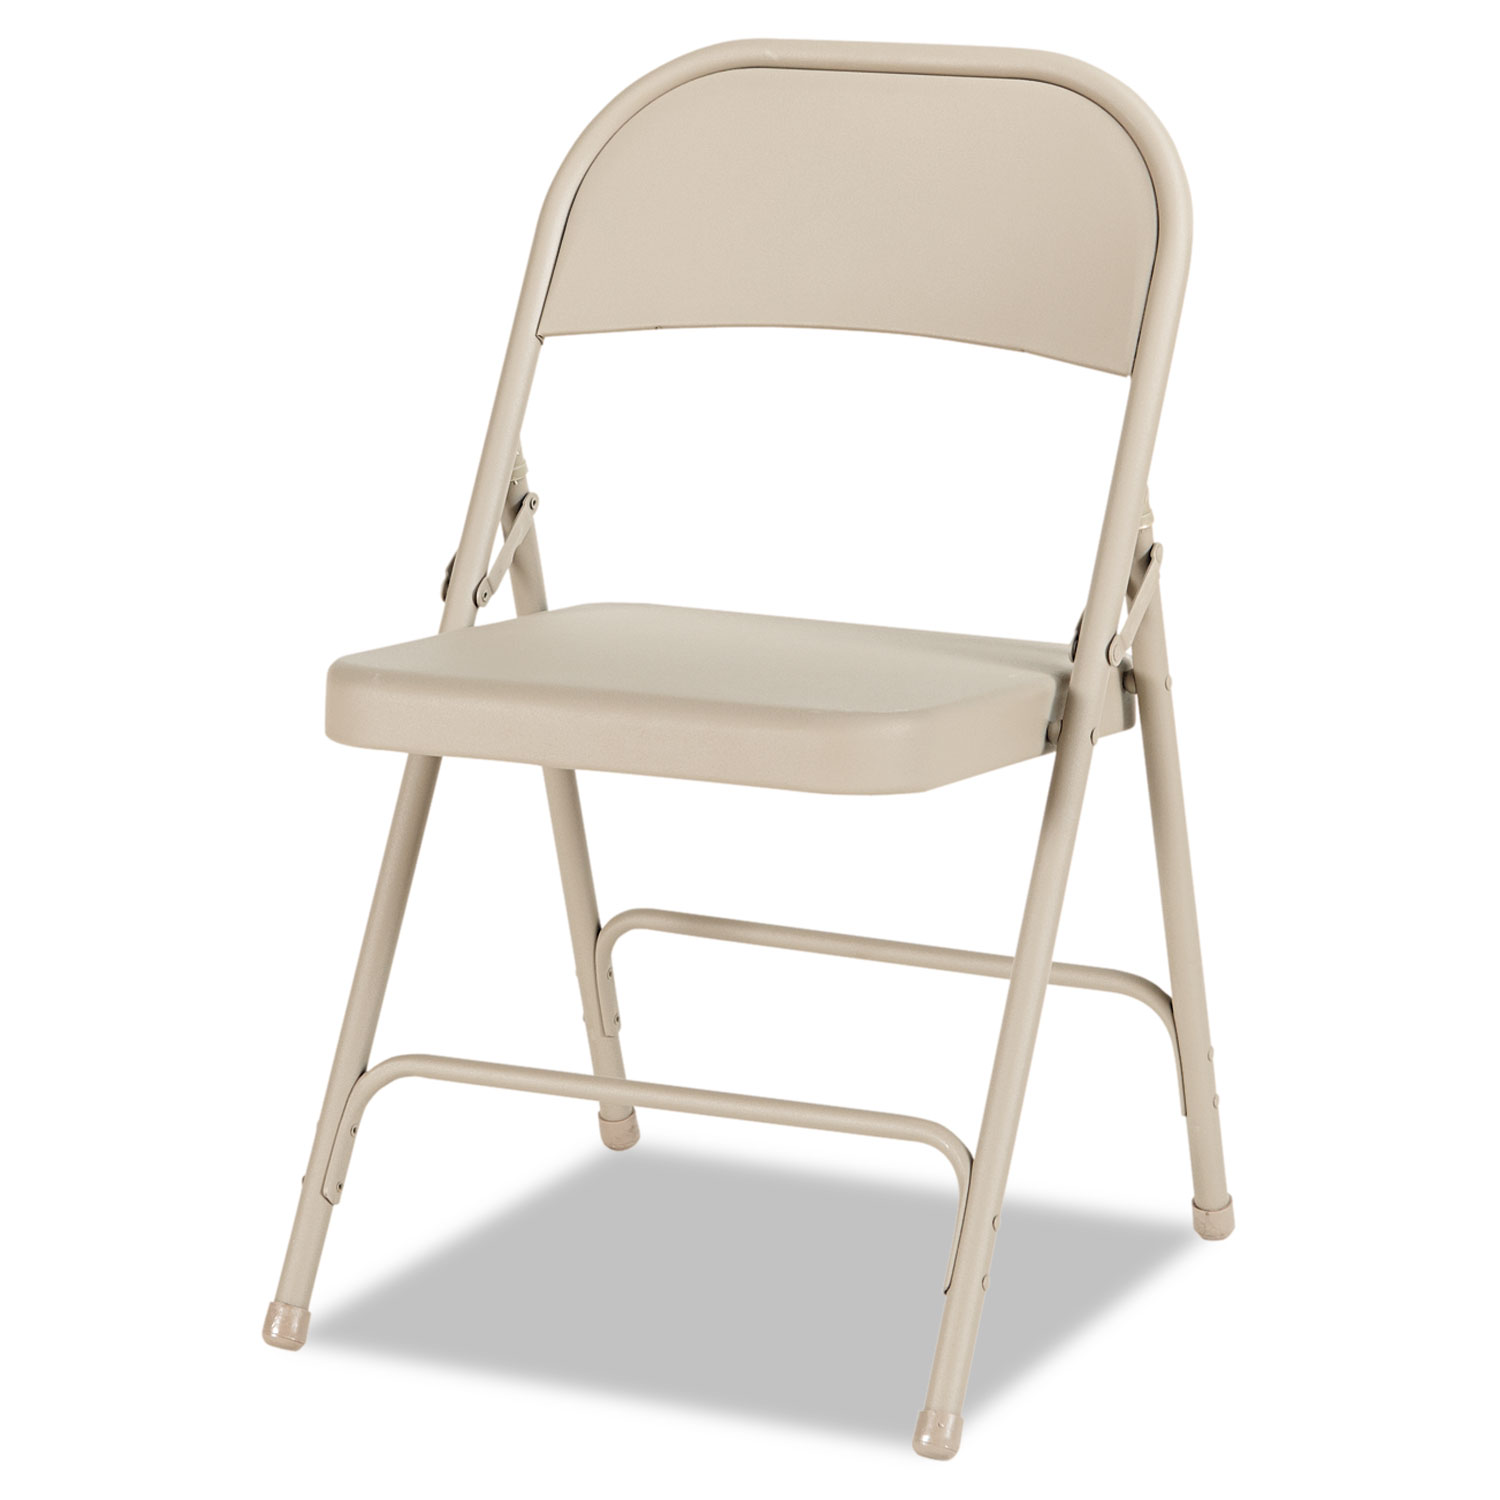 Steel Folding Chair with Two-Brace Support, Tan, 4/Carton